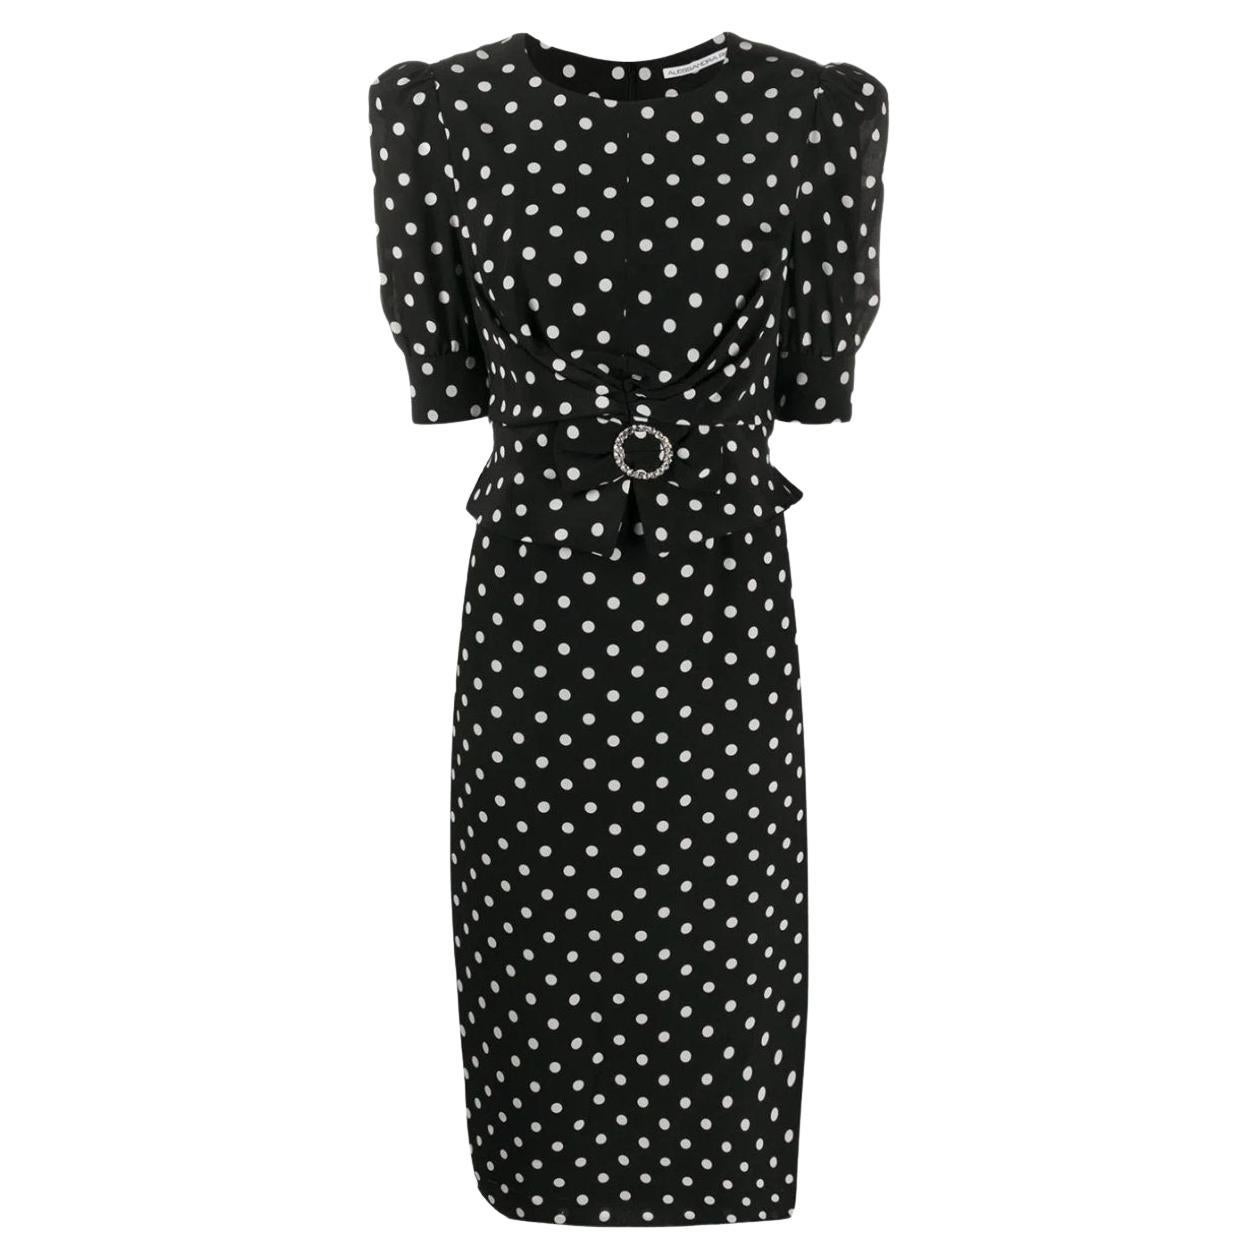 Alessandra Rich Black Polka Dot Fitted Silk Dress IT46 US10 For Sale